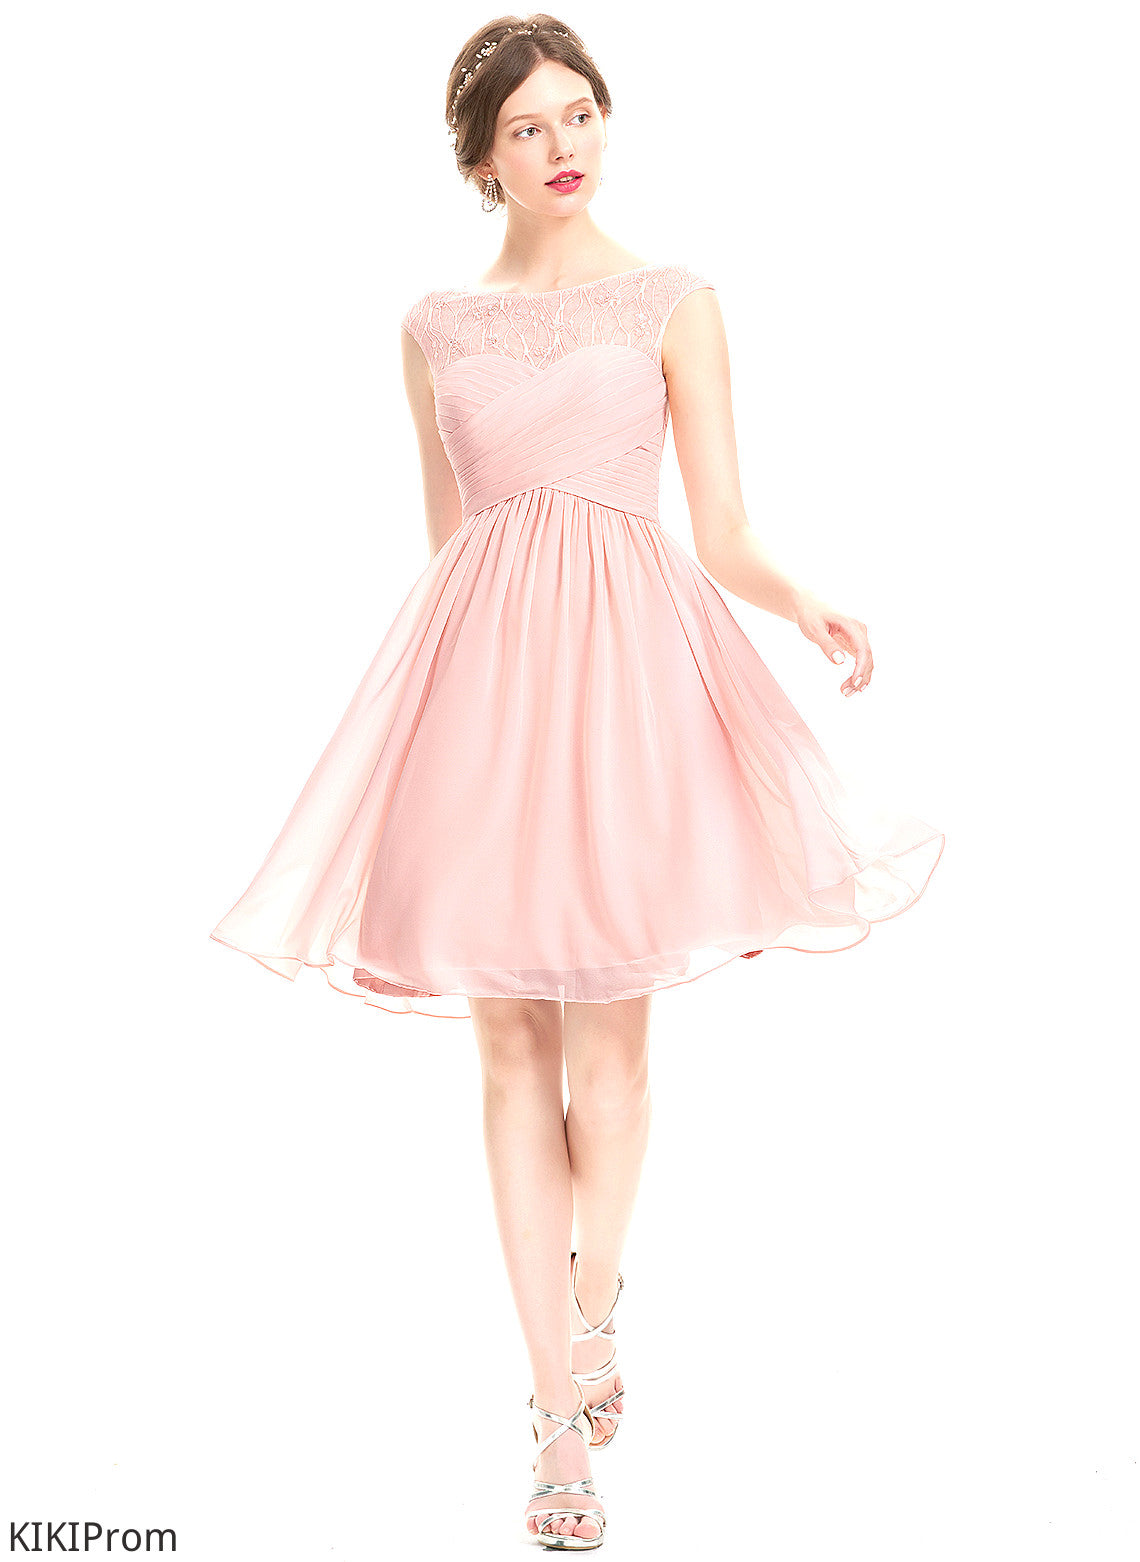 Beading Homecoming Dresses Knee-Length Makenzie Homecoming A-Line With Neck Chiffon Lace Scoop Ruffle Dress